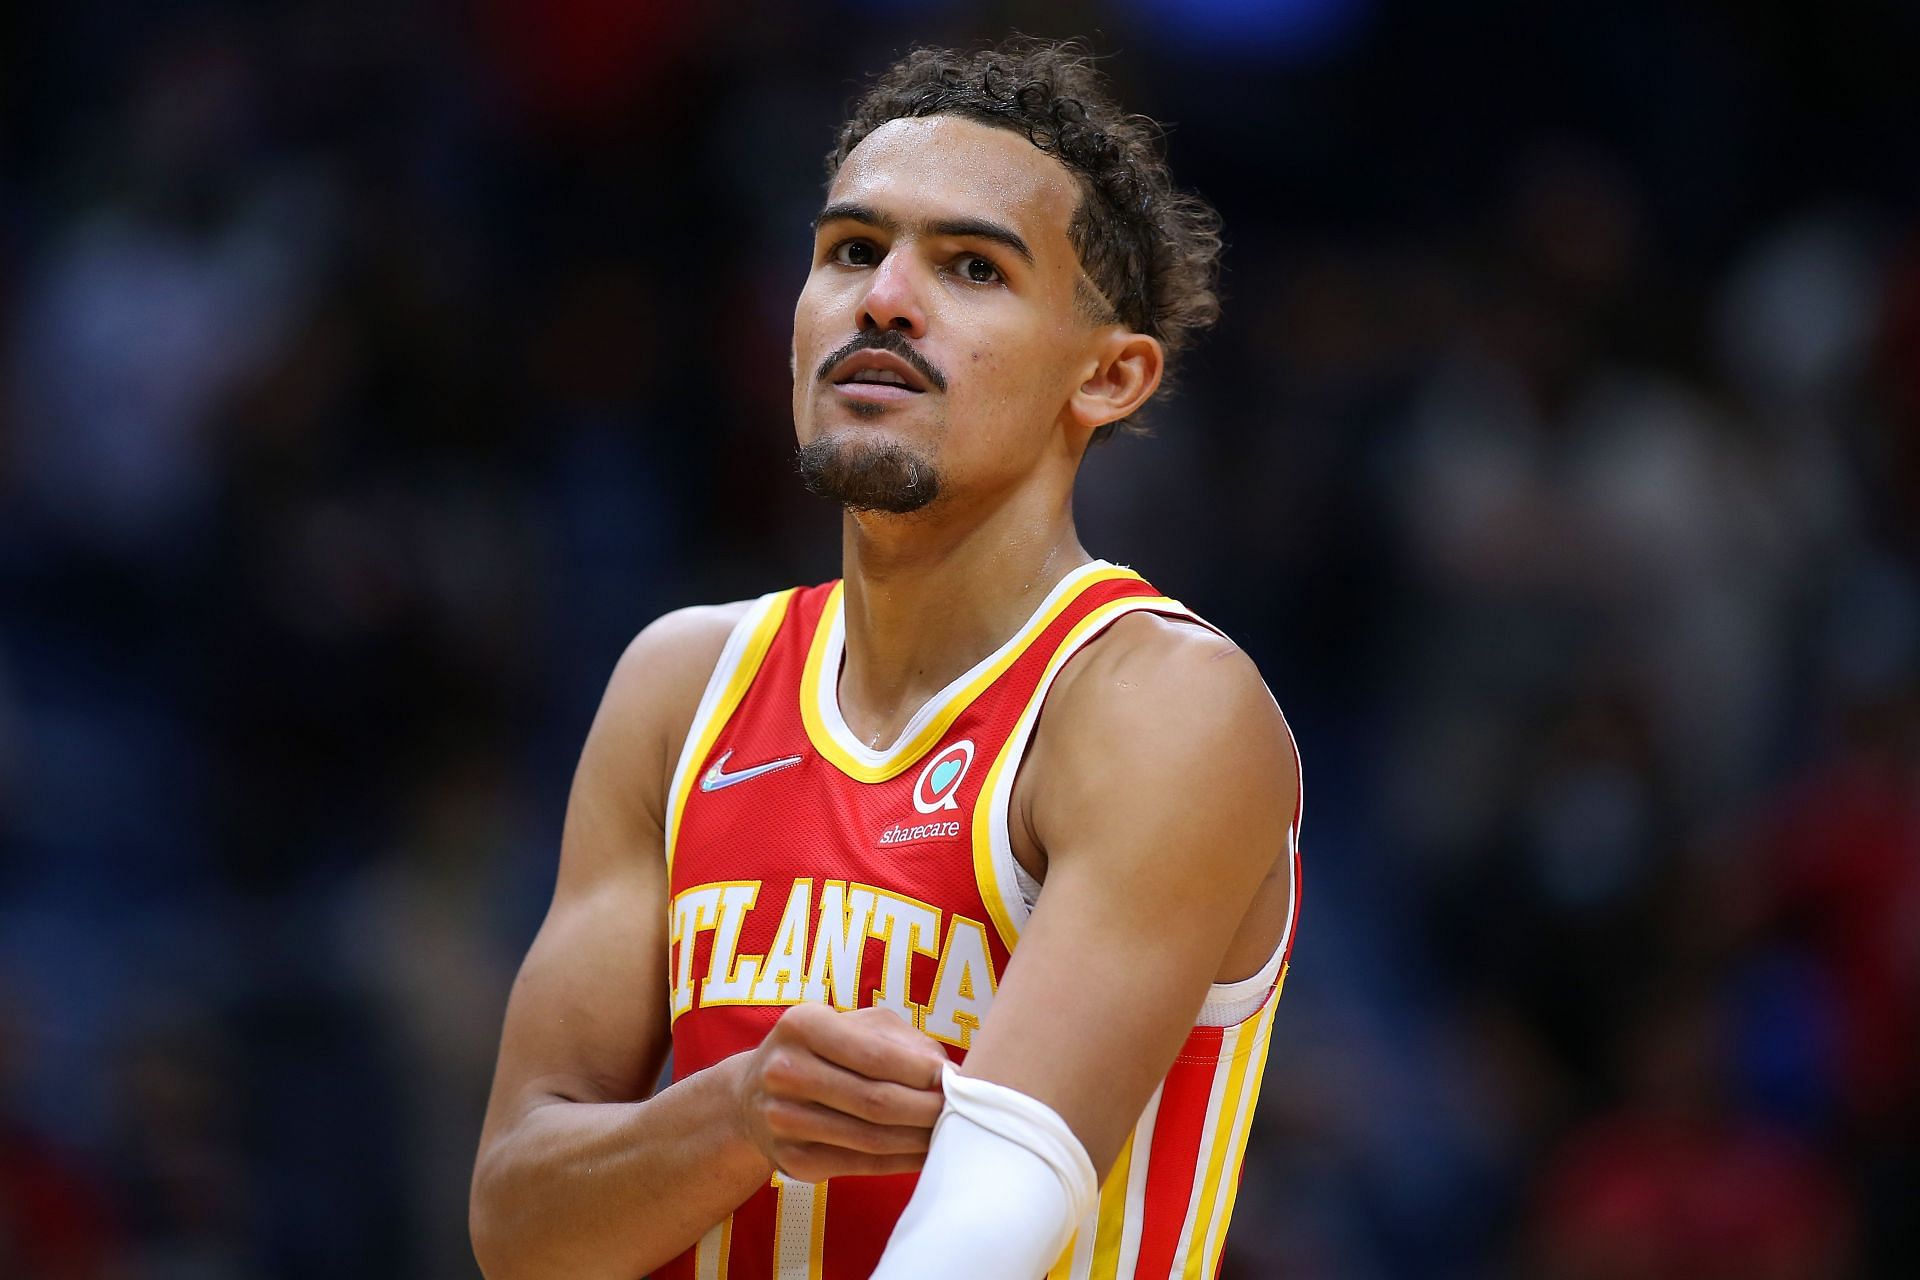 Trae Young in action during the Atlanta Hawks vs New Orleans Pelicans game